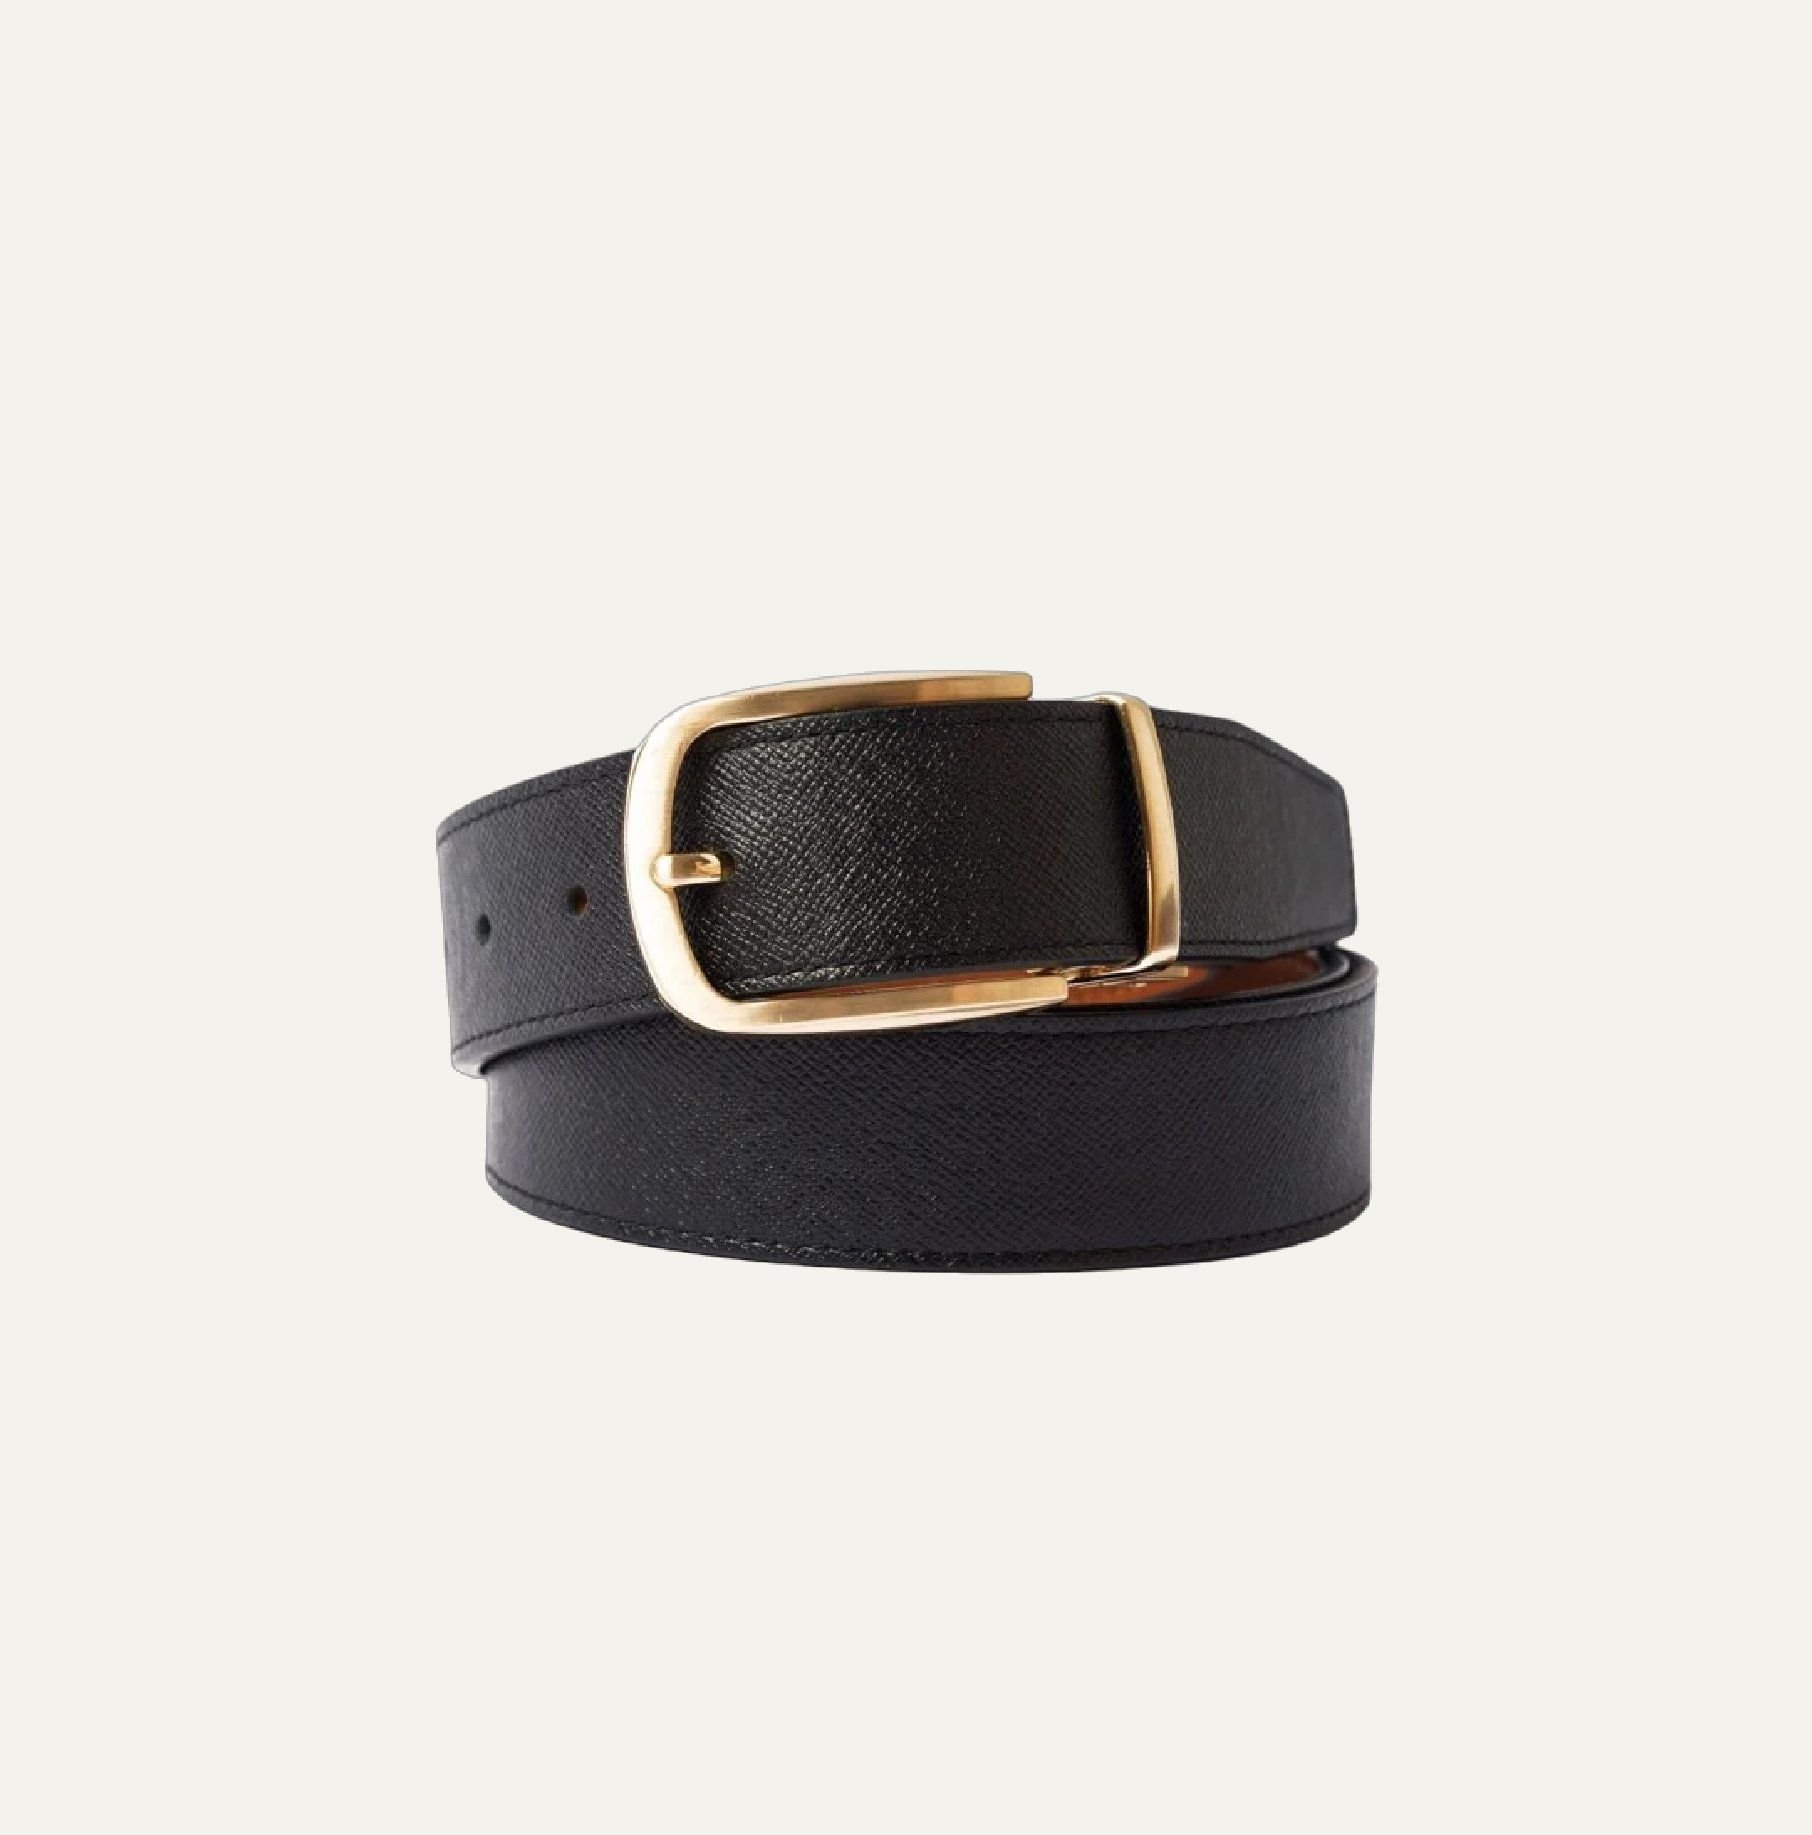  AG LEATHER BELTS OVAL HEAD GOLD 